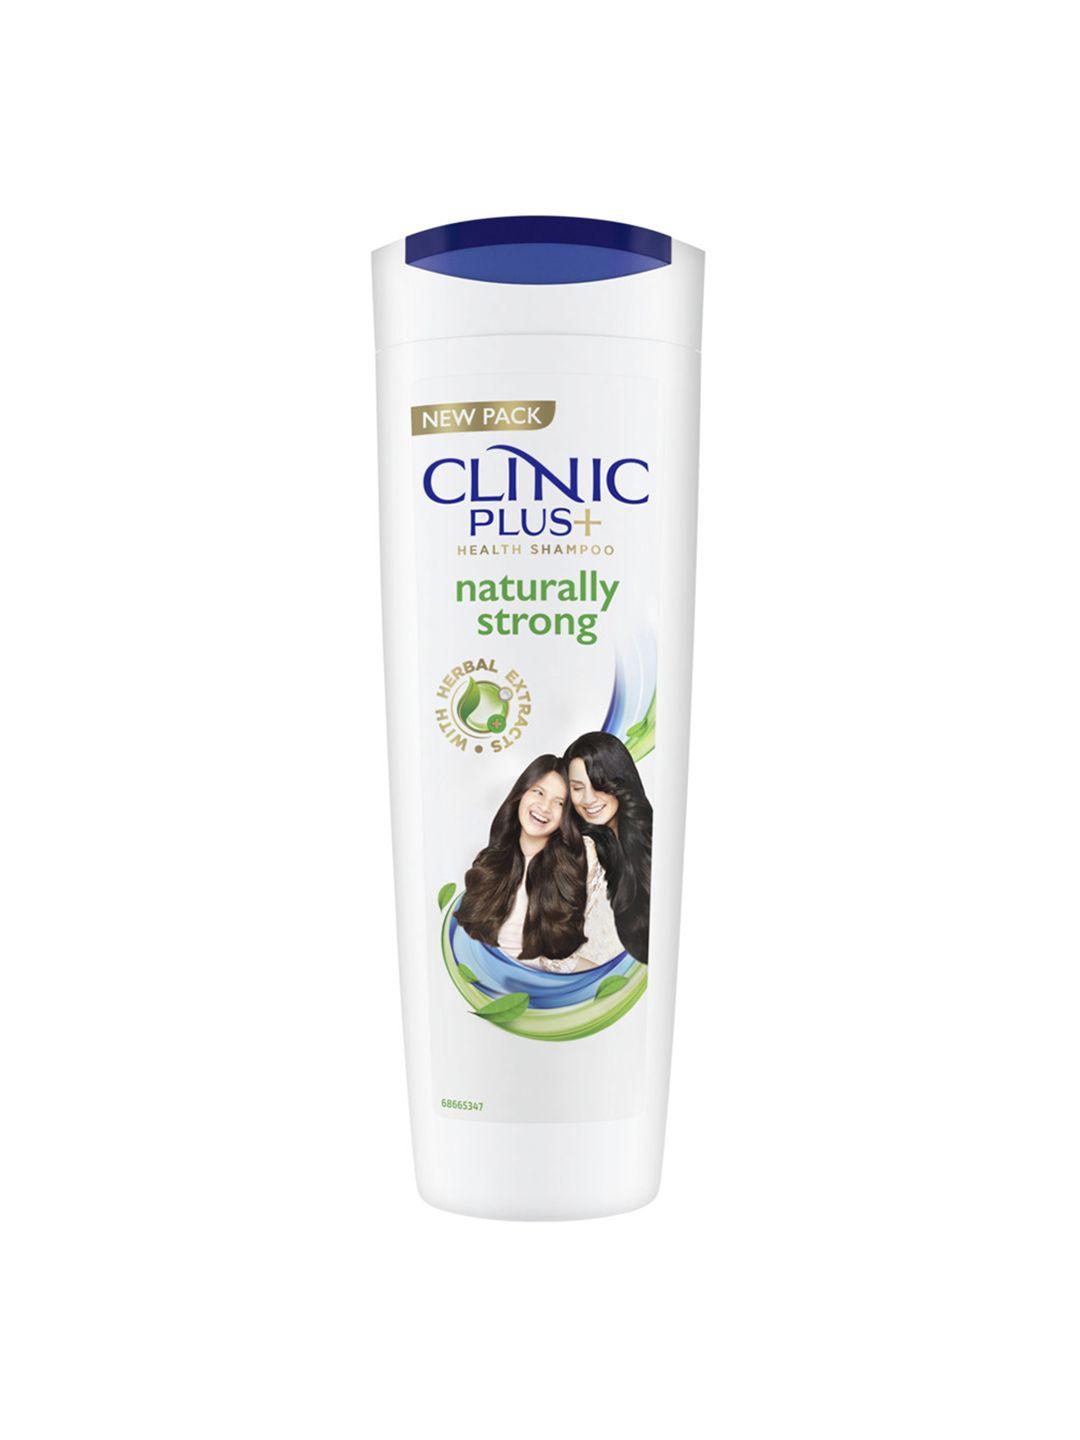 clinic plus naturally strong health shampoo with herbal extracts - 355ml